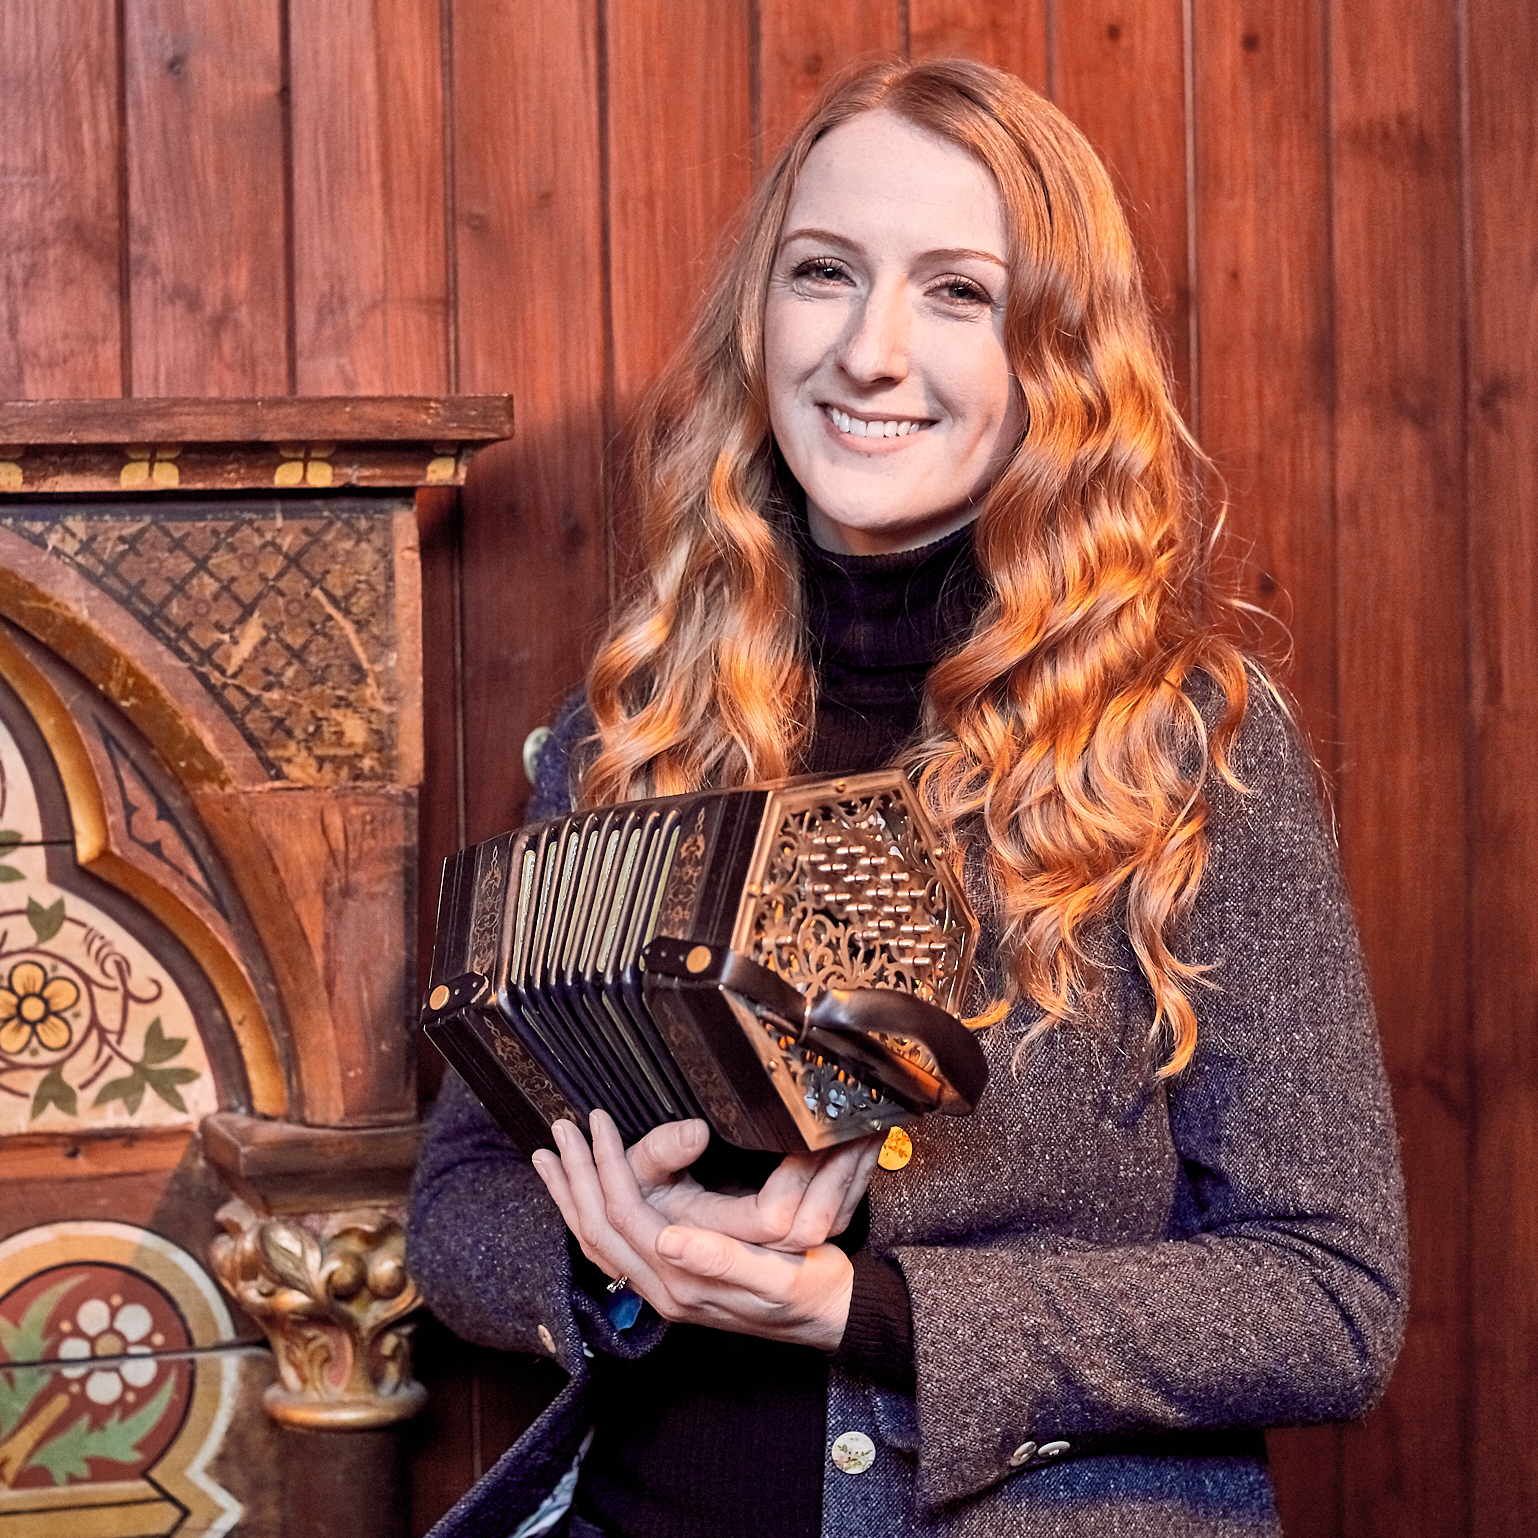 Caitlín Nic Gabhann holding a concertina while smiling at the camera.